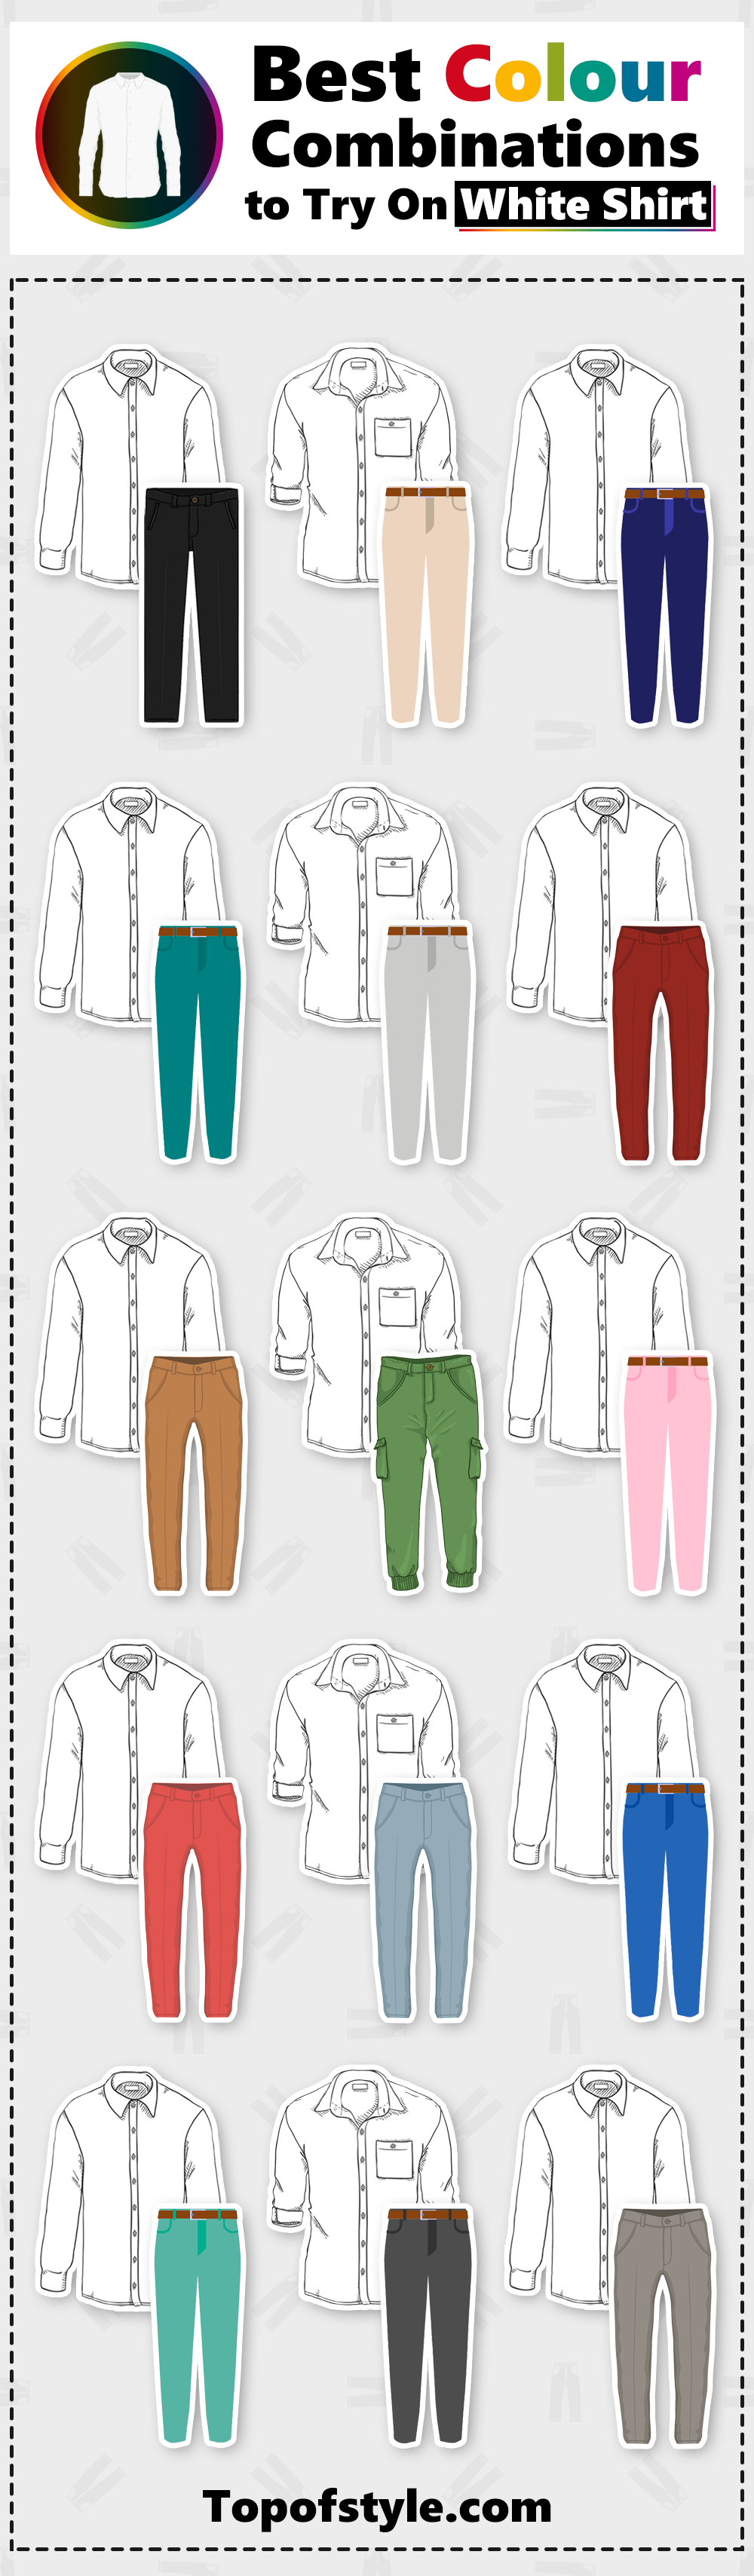 Men's Guide to Matching Pant Shirt Color Combination - LooksGud.com